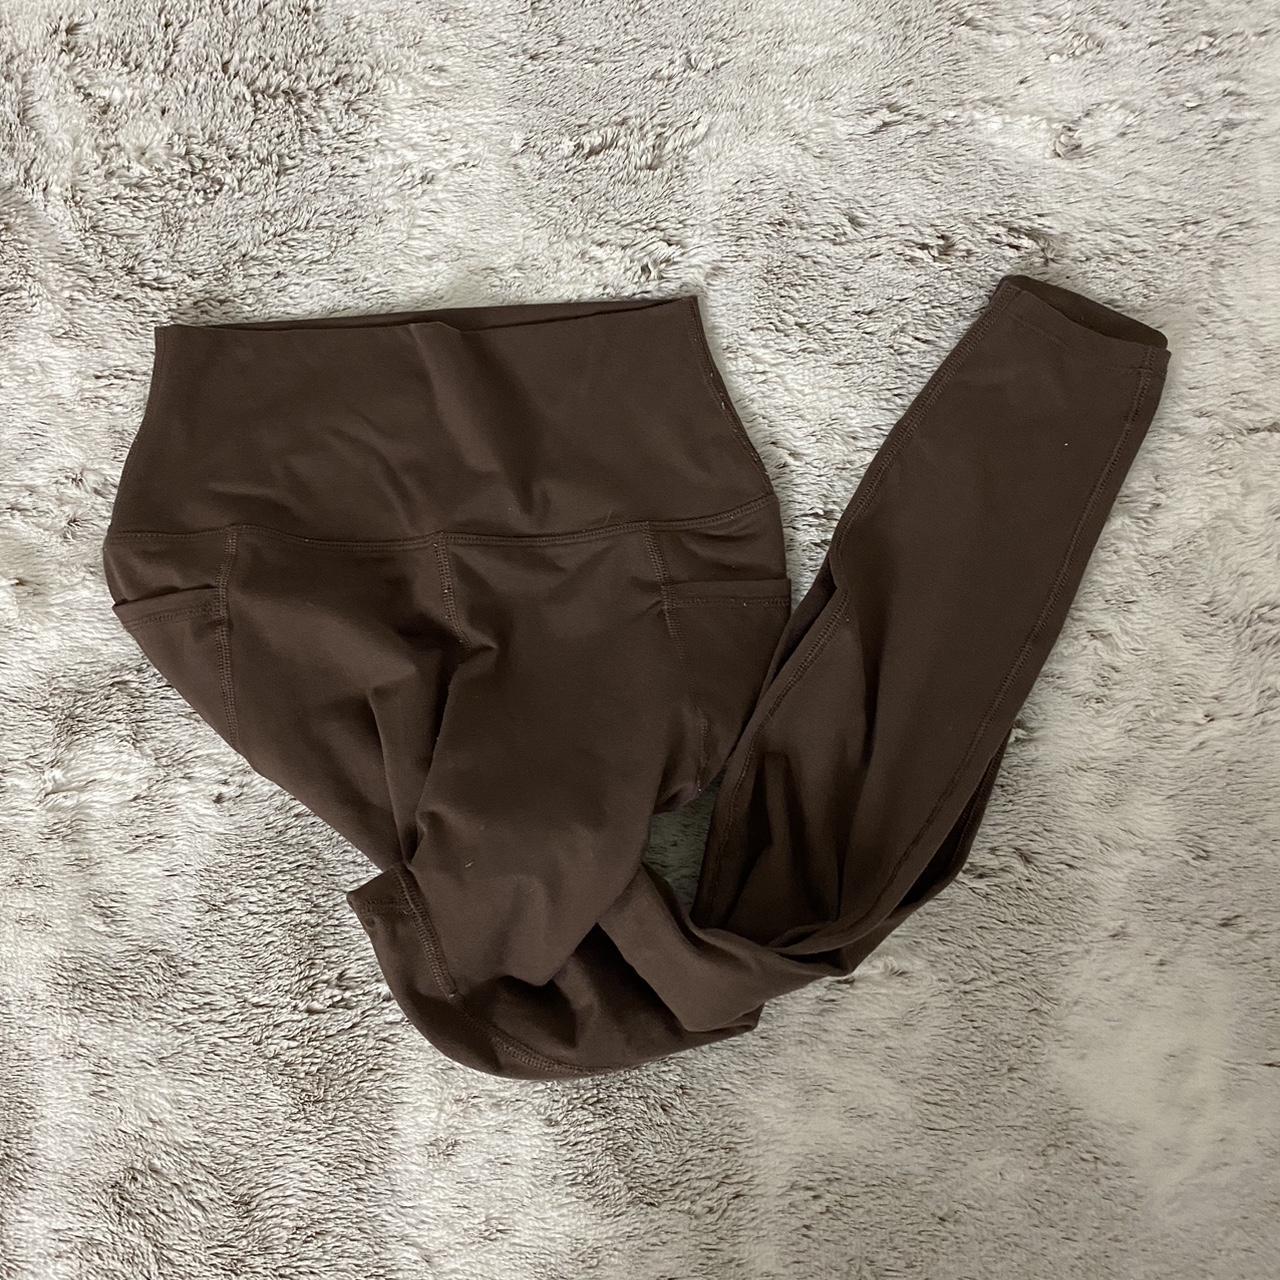 SAGE Collective Brown Leggings Very soft and - Depop